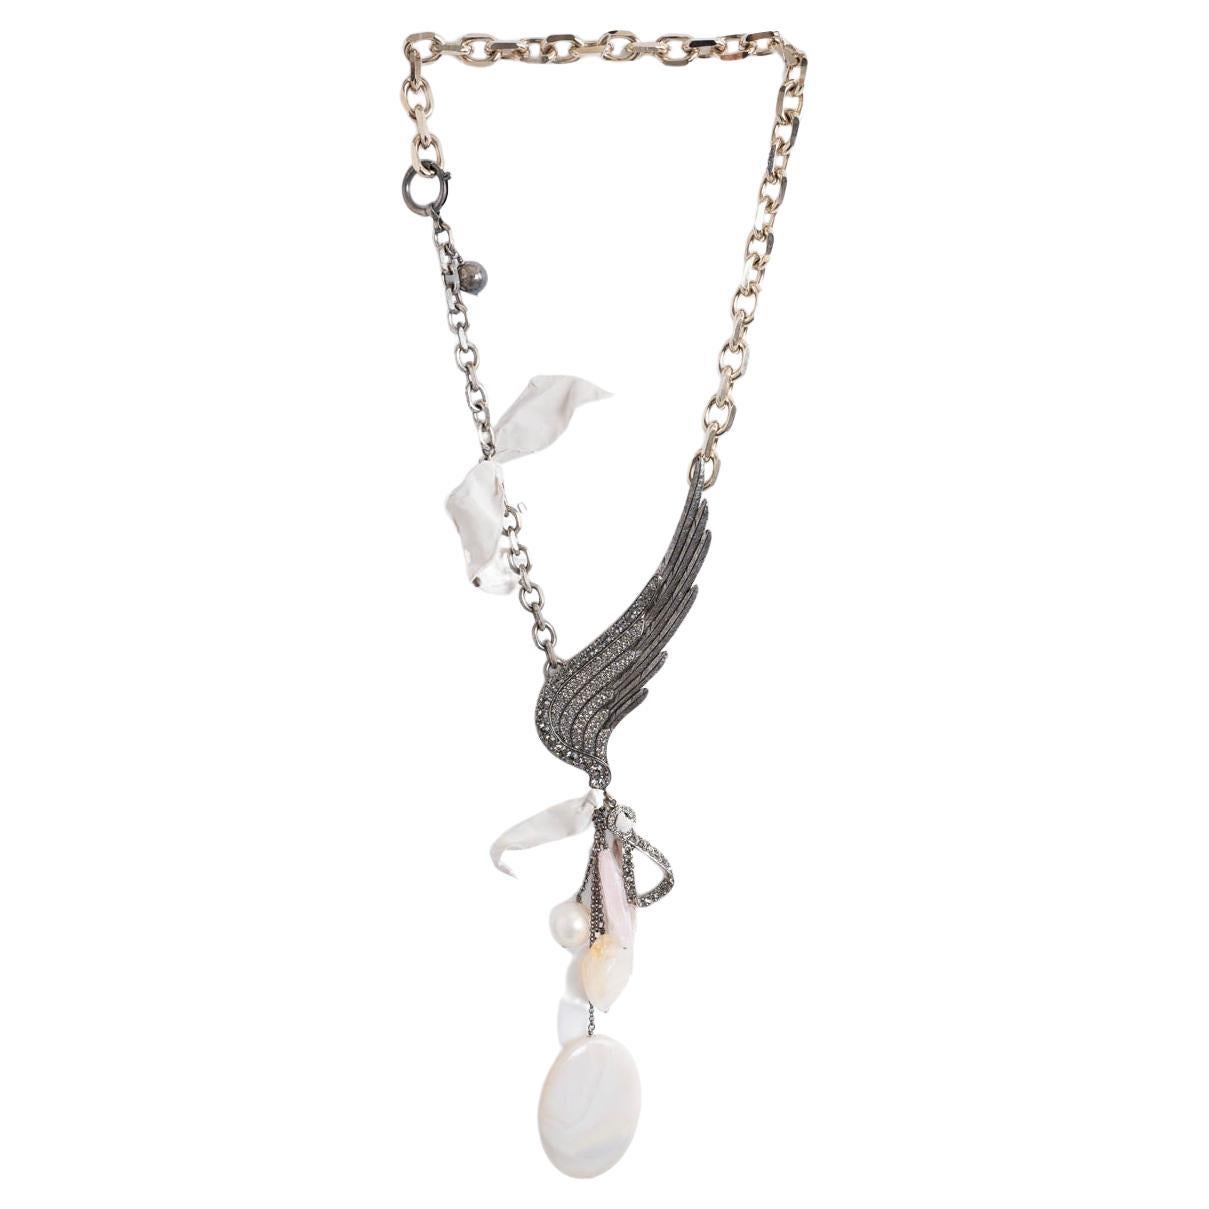 LANVIN metal CRYSTAL WING & STONE CHAIN Necklace Retails $9.8k For Sale